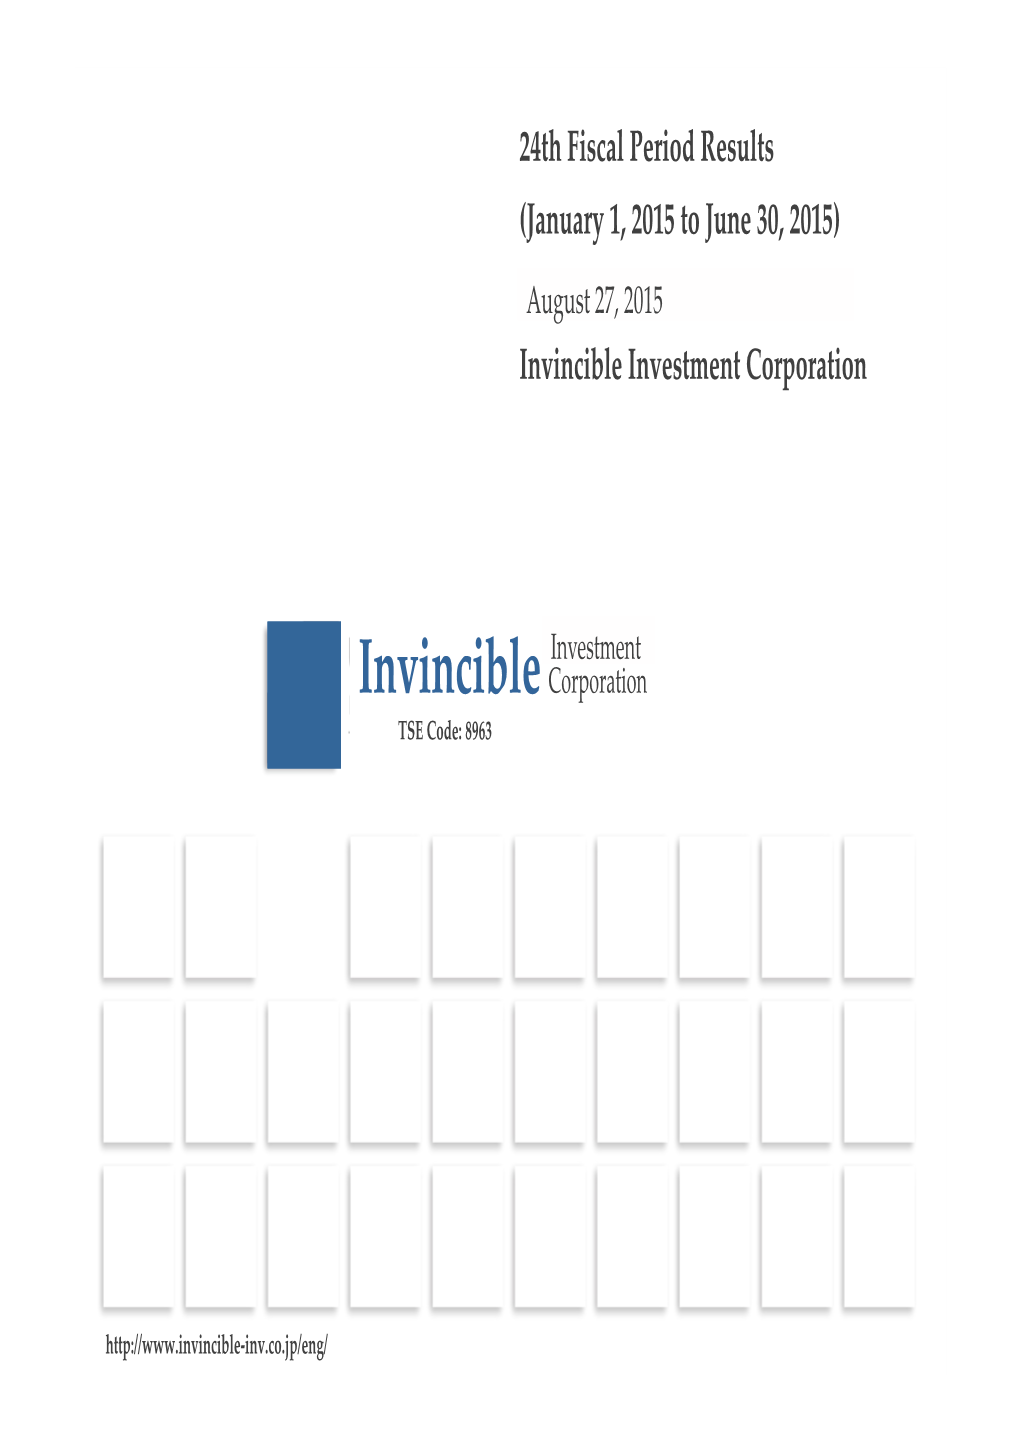 24Th Fiscal Period Results (January 1, 2015 to June 30, 2015) Invincible Investment Corporation